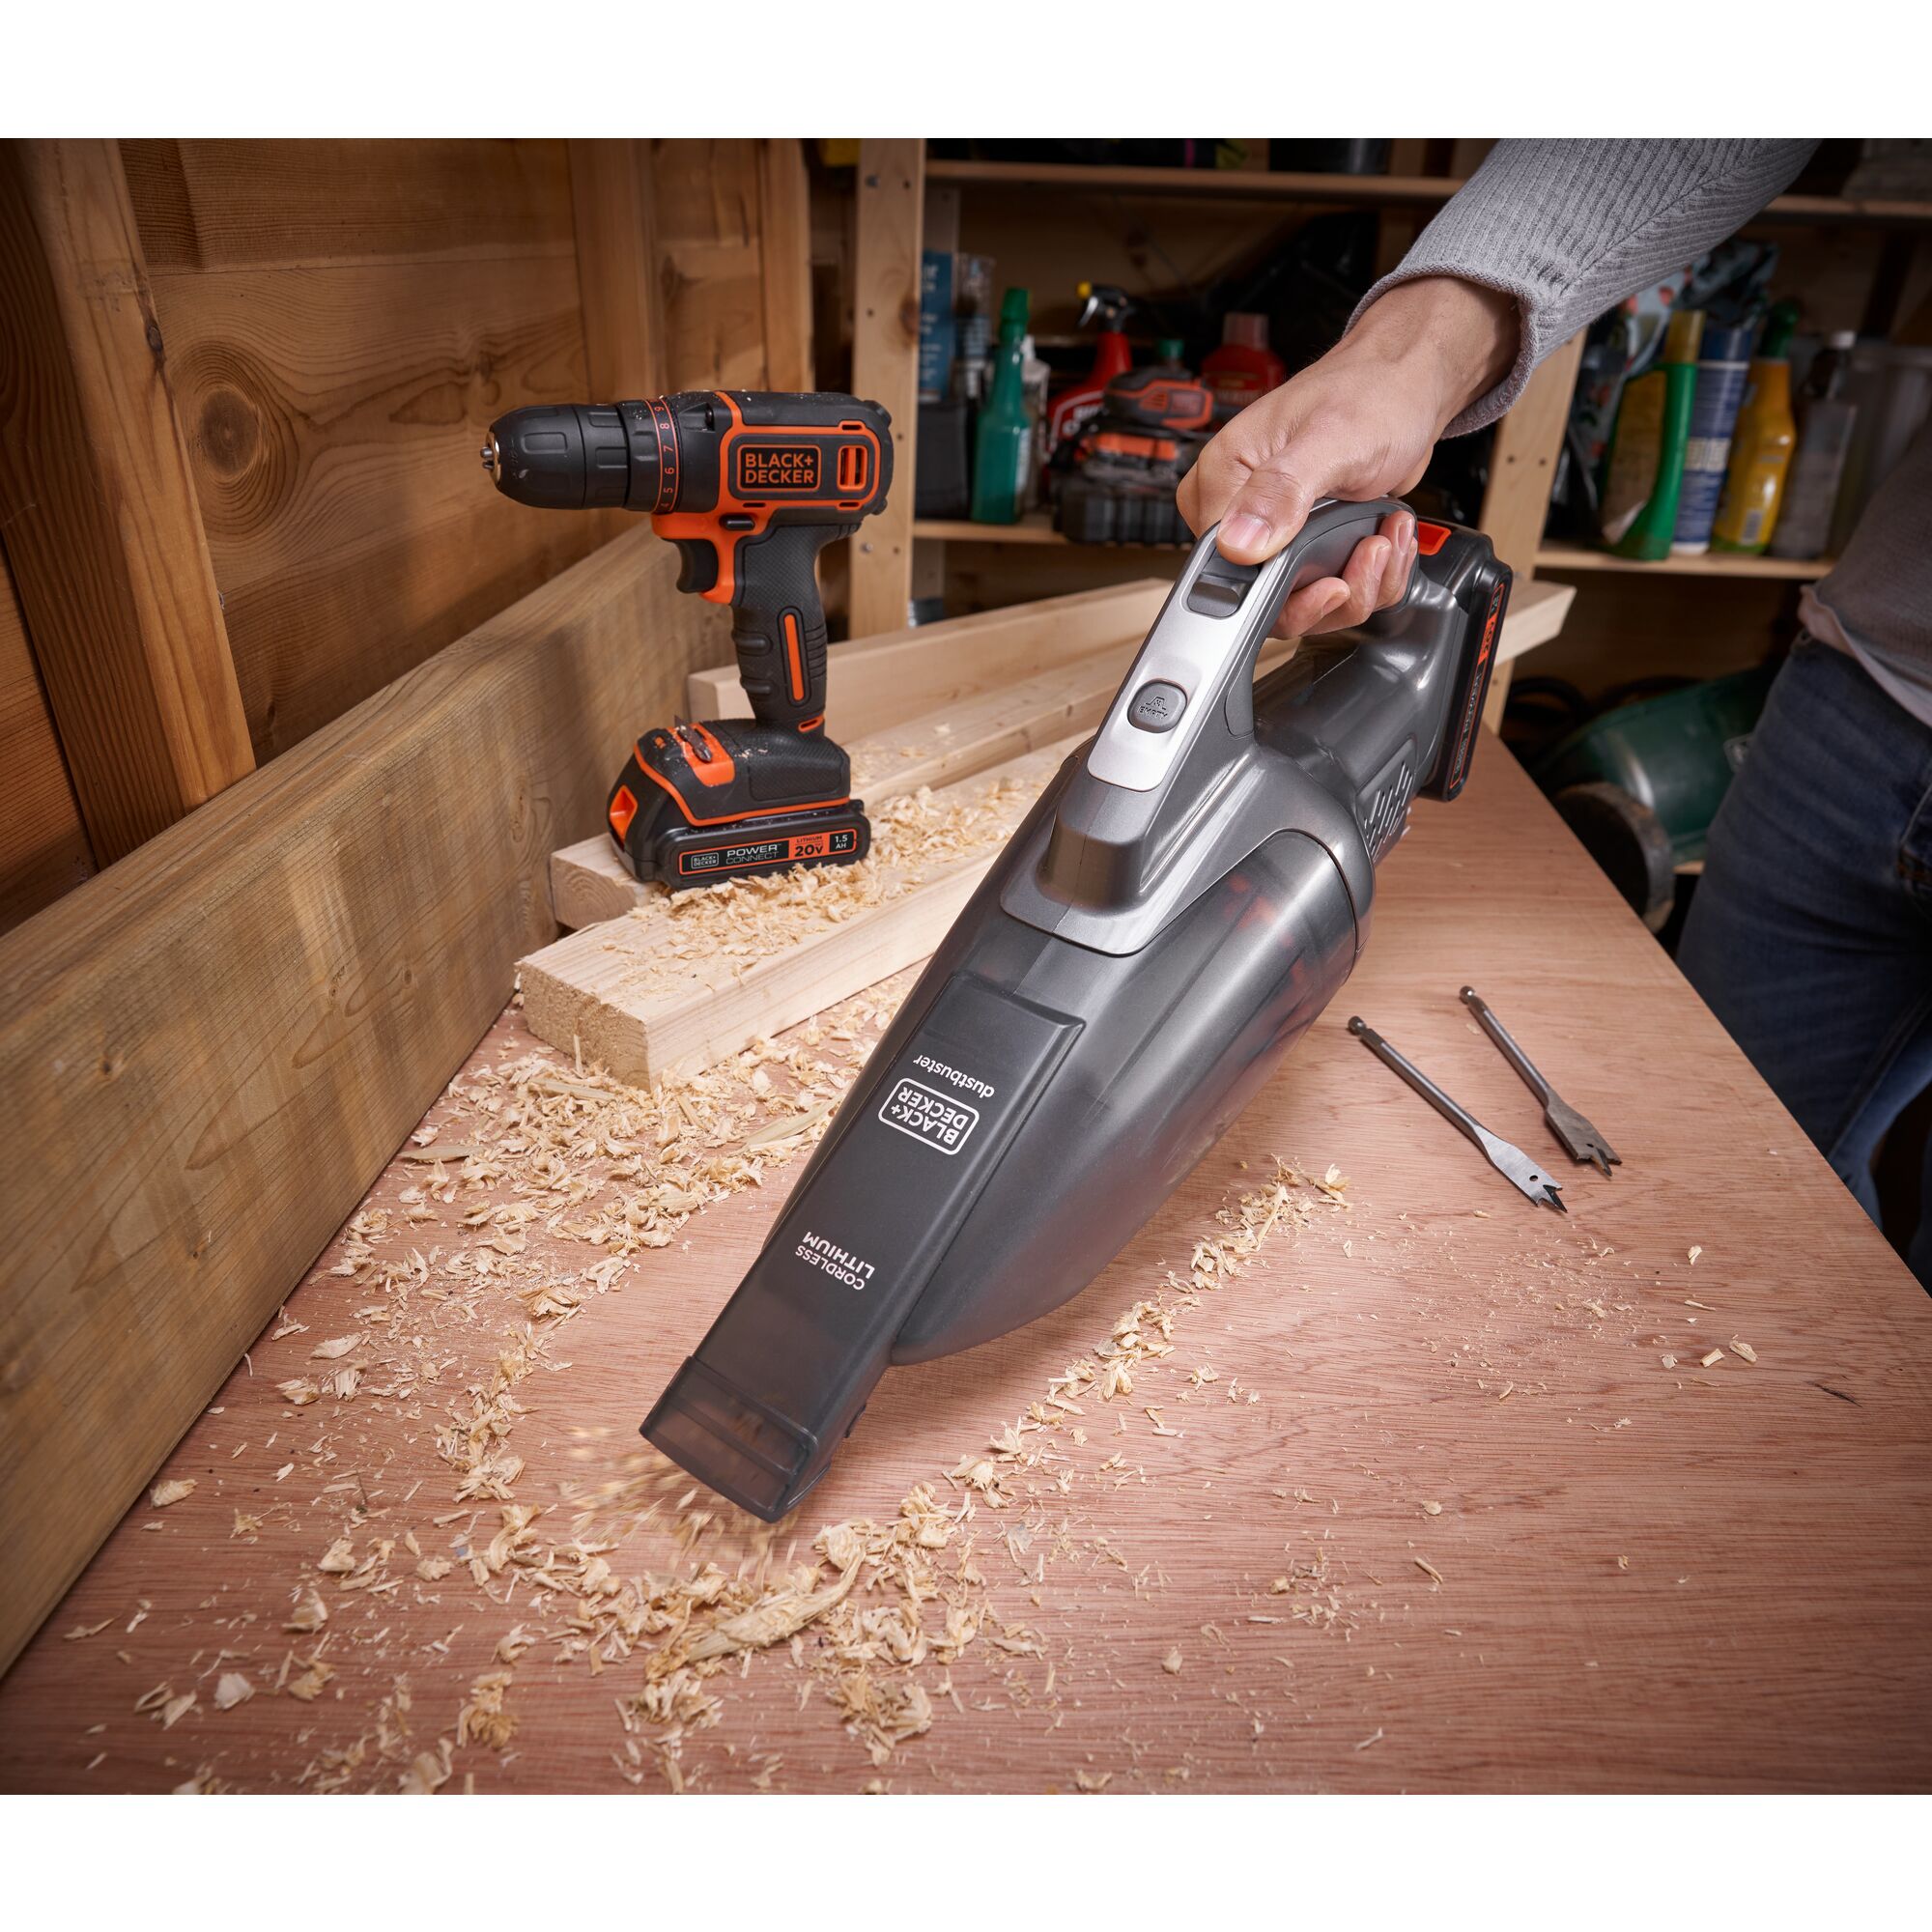 Black and decker Dustbuster 20V MAX* POWERCONNECT Cordless Handheld Vacuum being used to clean up dust debri from a workbench